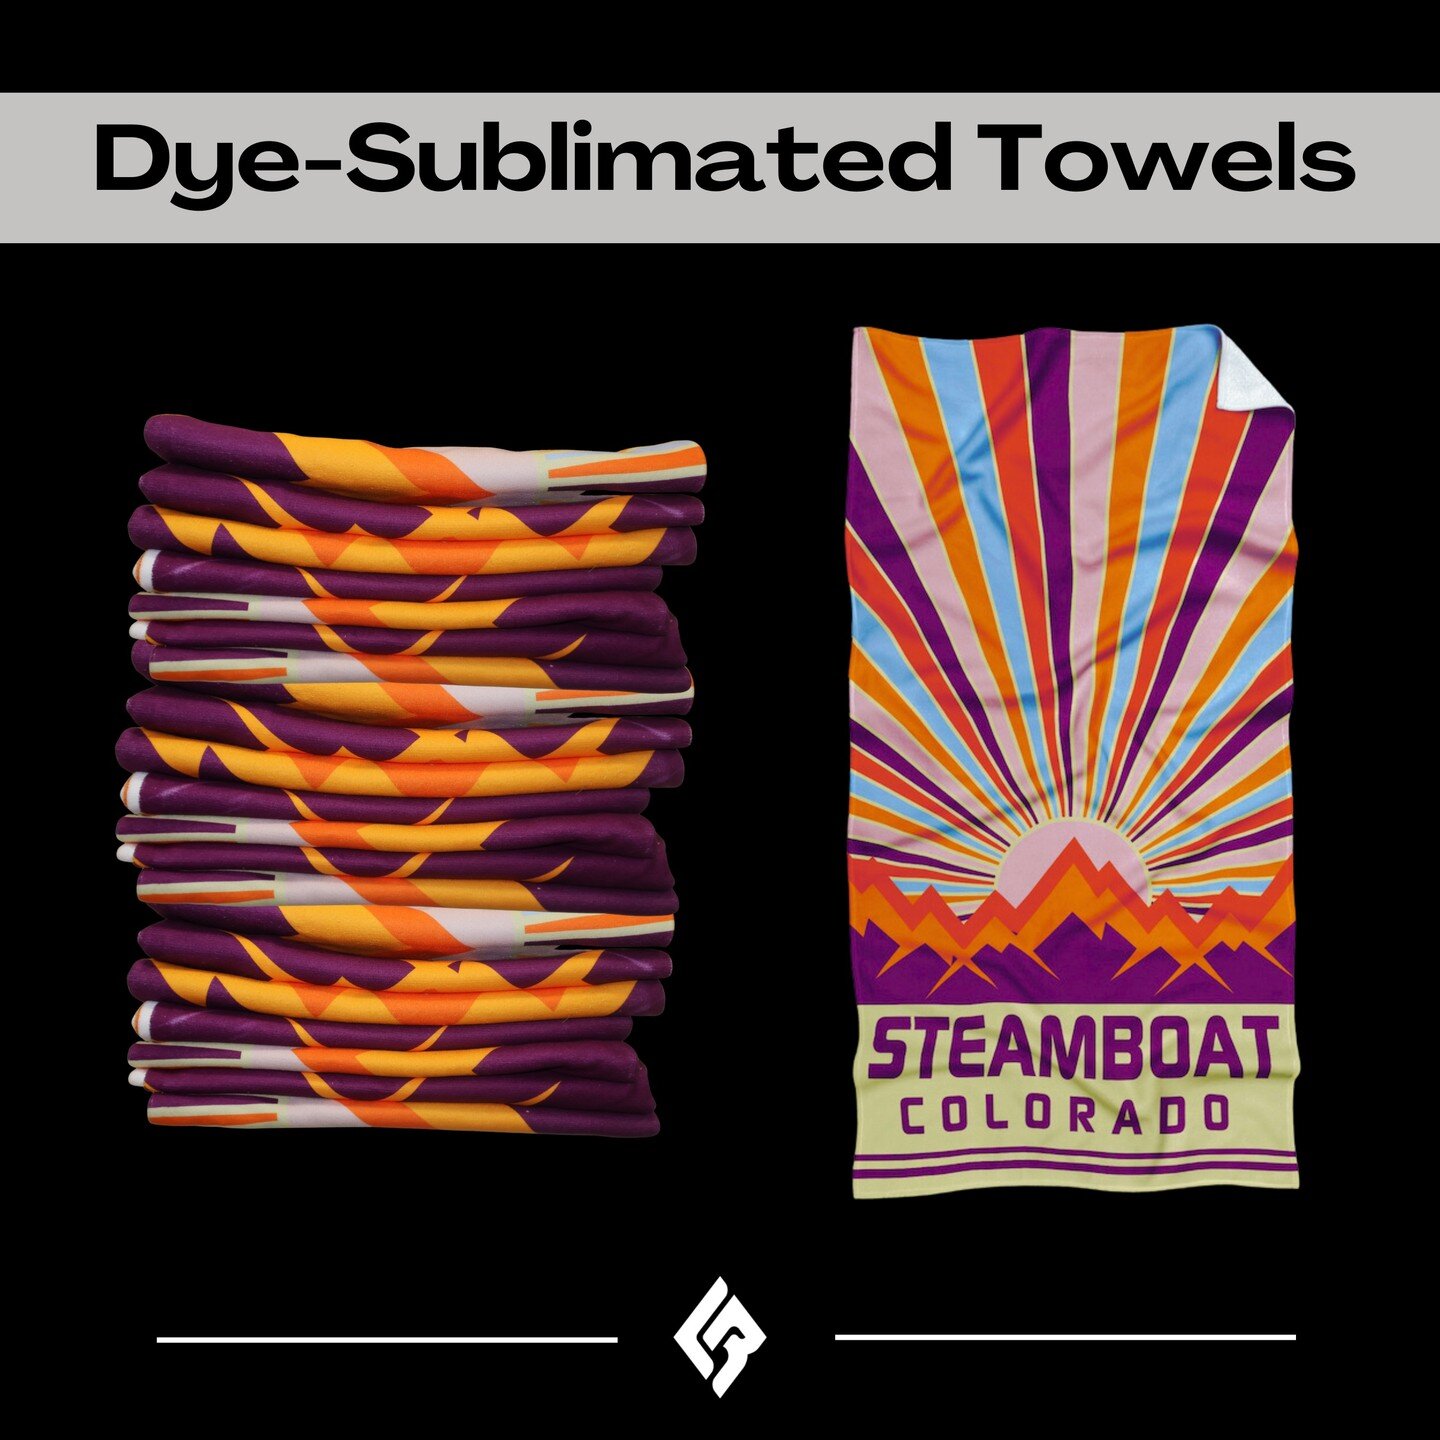 Imagine wrapping yourself in the softest, most vibrant souvenir ever... Introducing Lone Rock's NEW plush velour towels, featuring breathtaking dye-sublimated designs of your favorite resort destinations! ✨ These are no ordinary towels &ndash; they'r